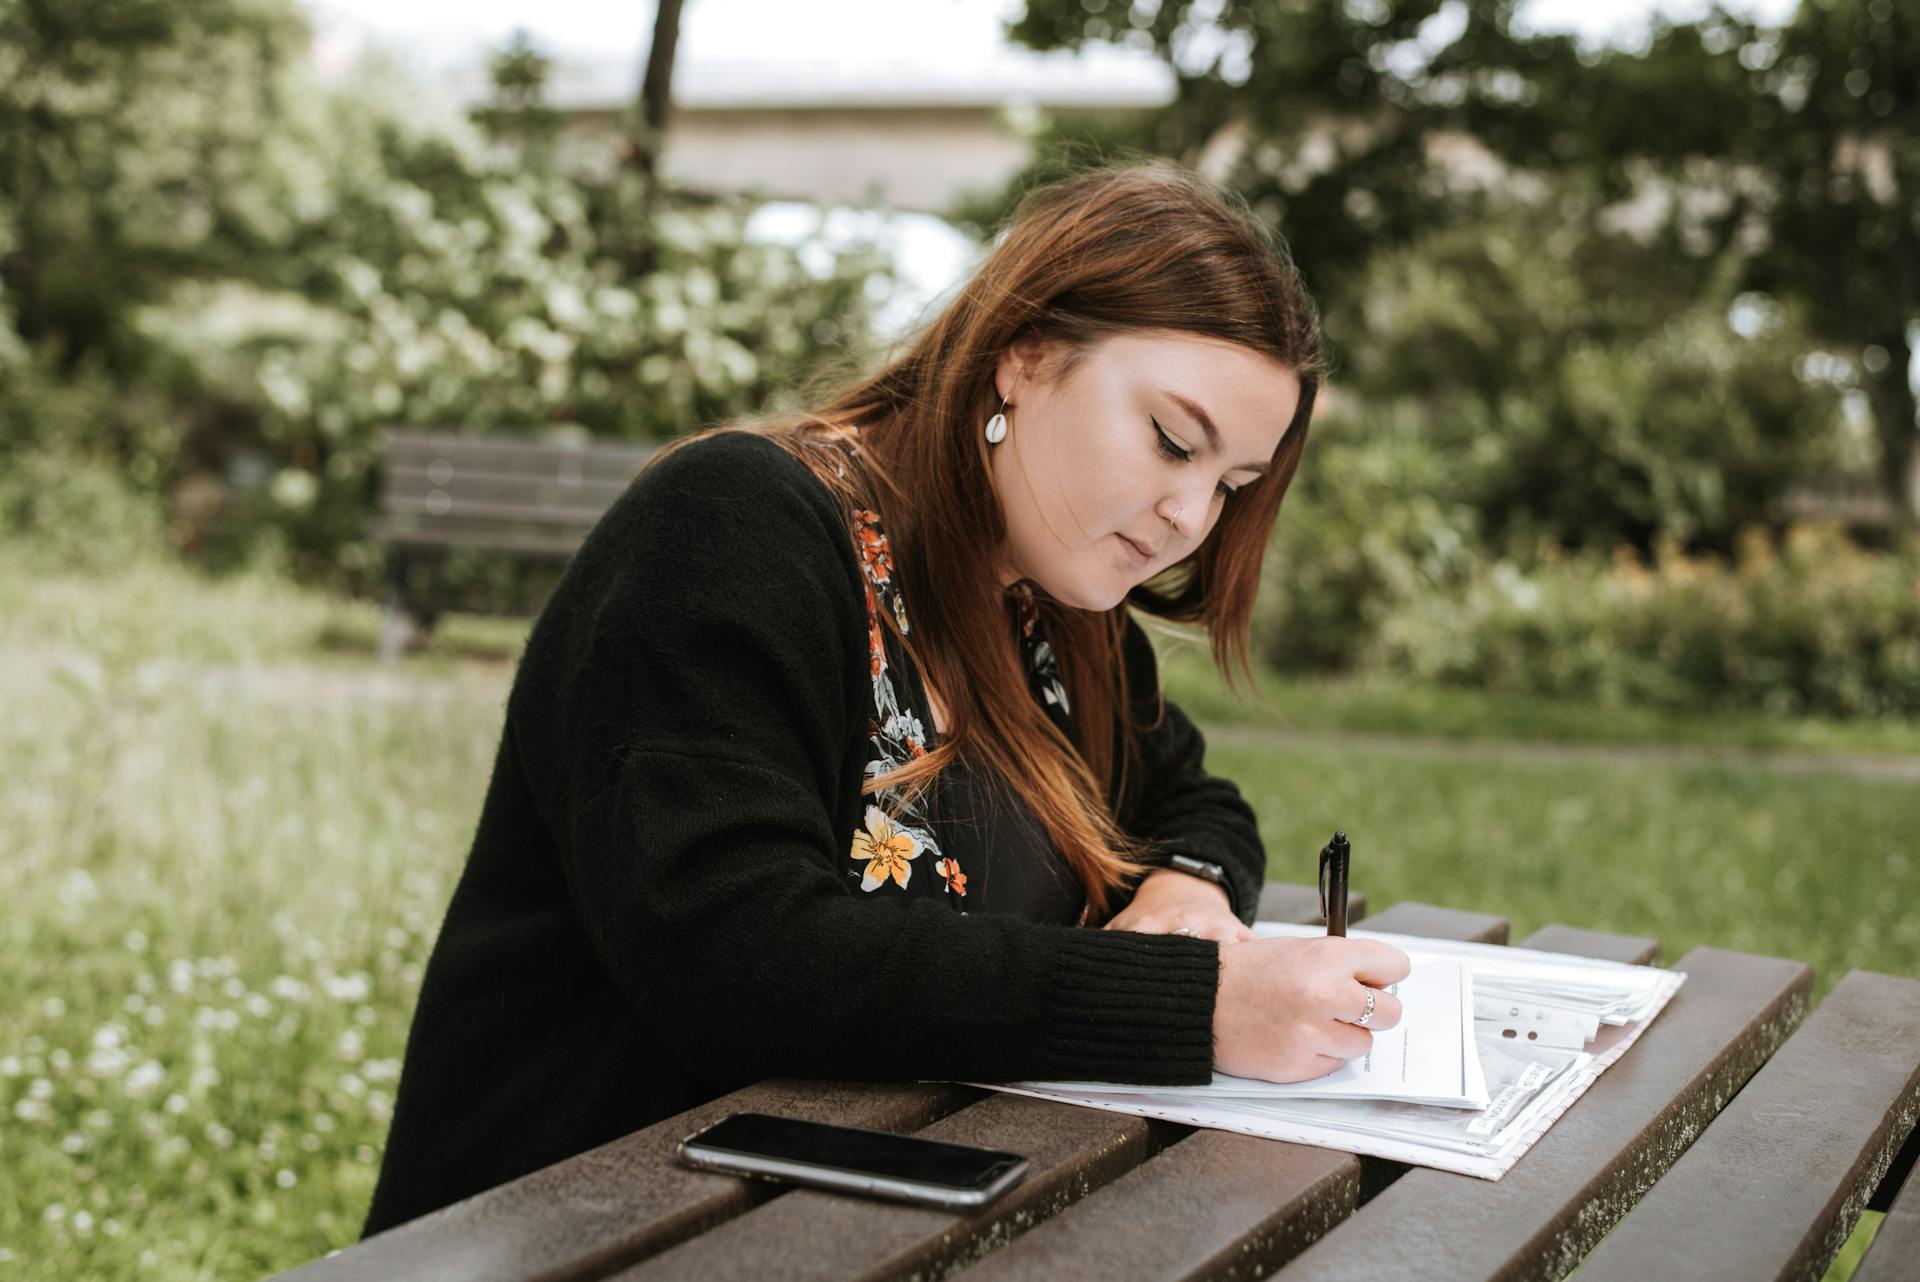 Concentrated woman writing notes in papers in park